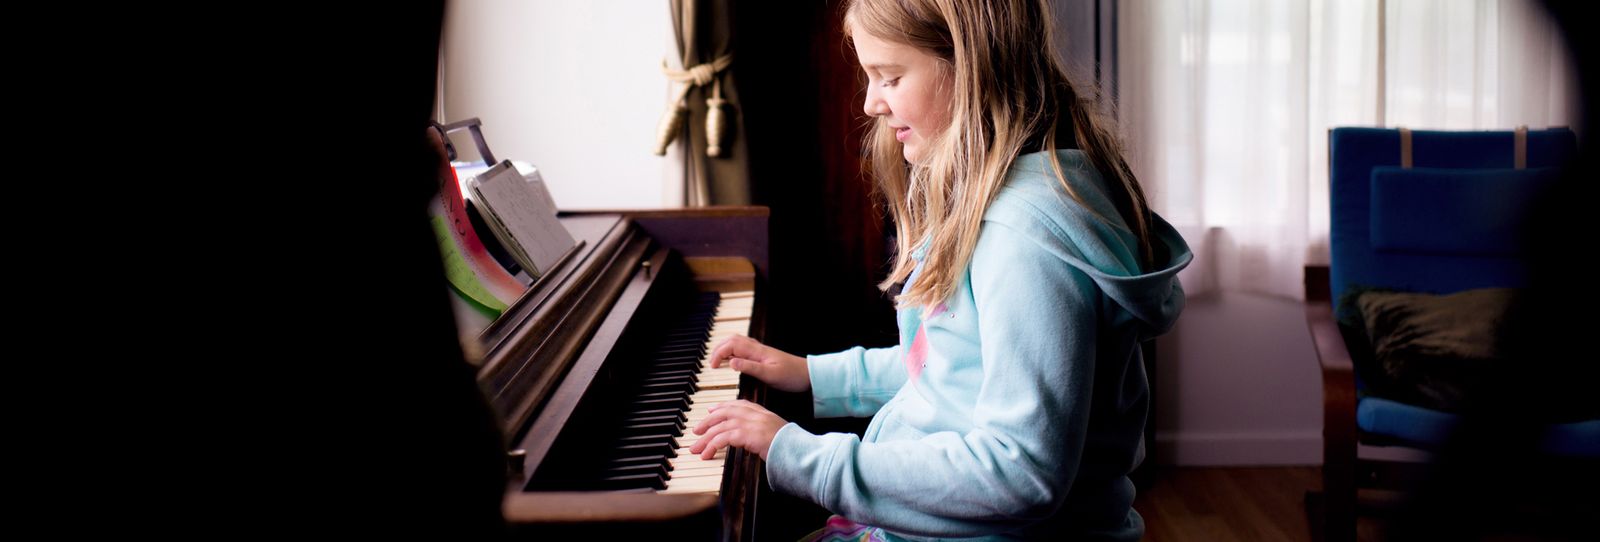 Learn Piano for Beginners: Find Local Classes Now